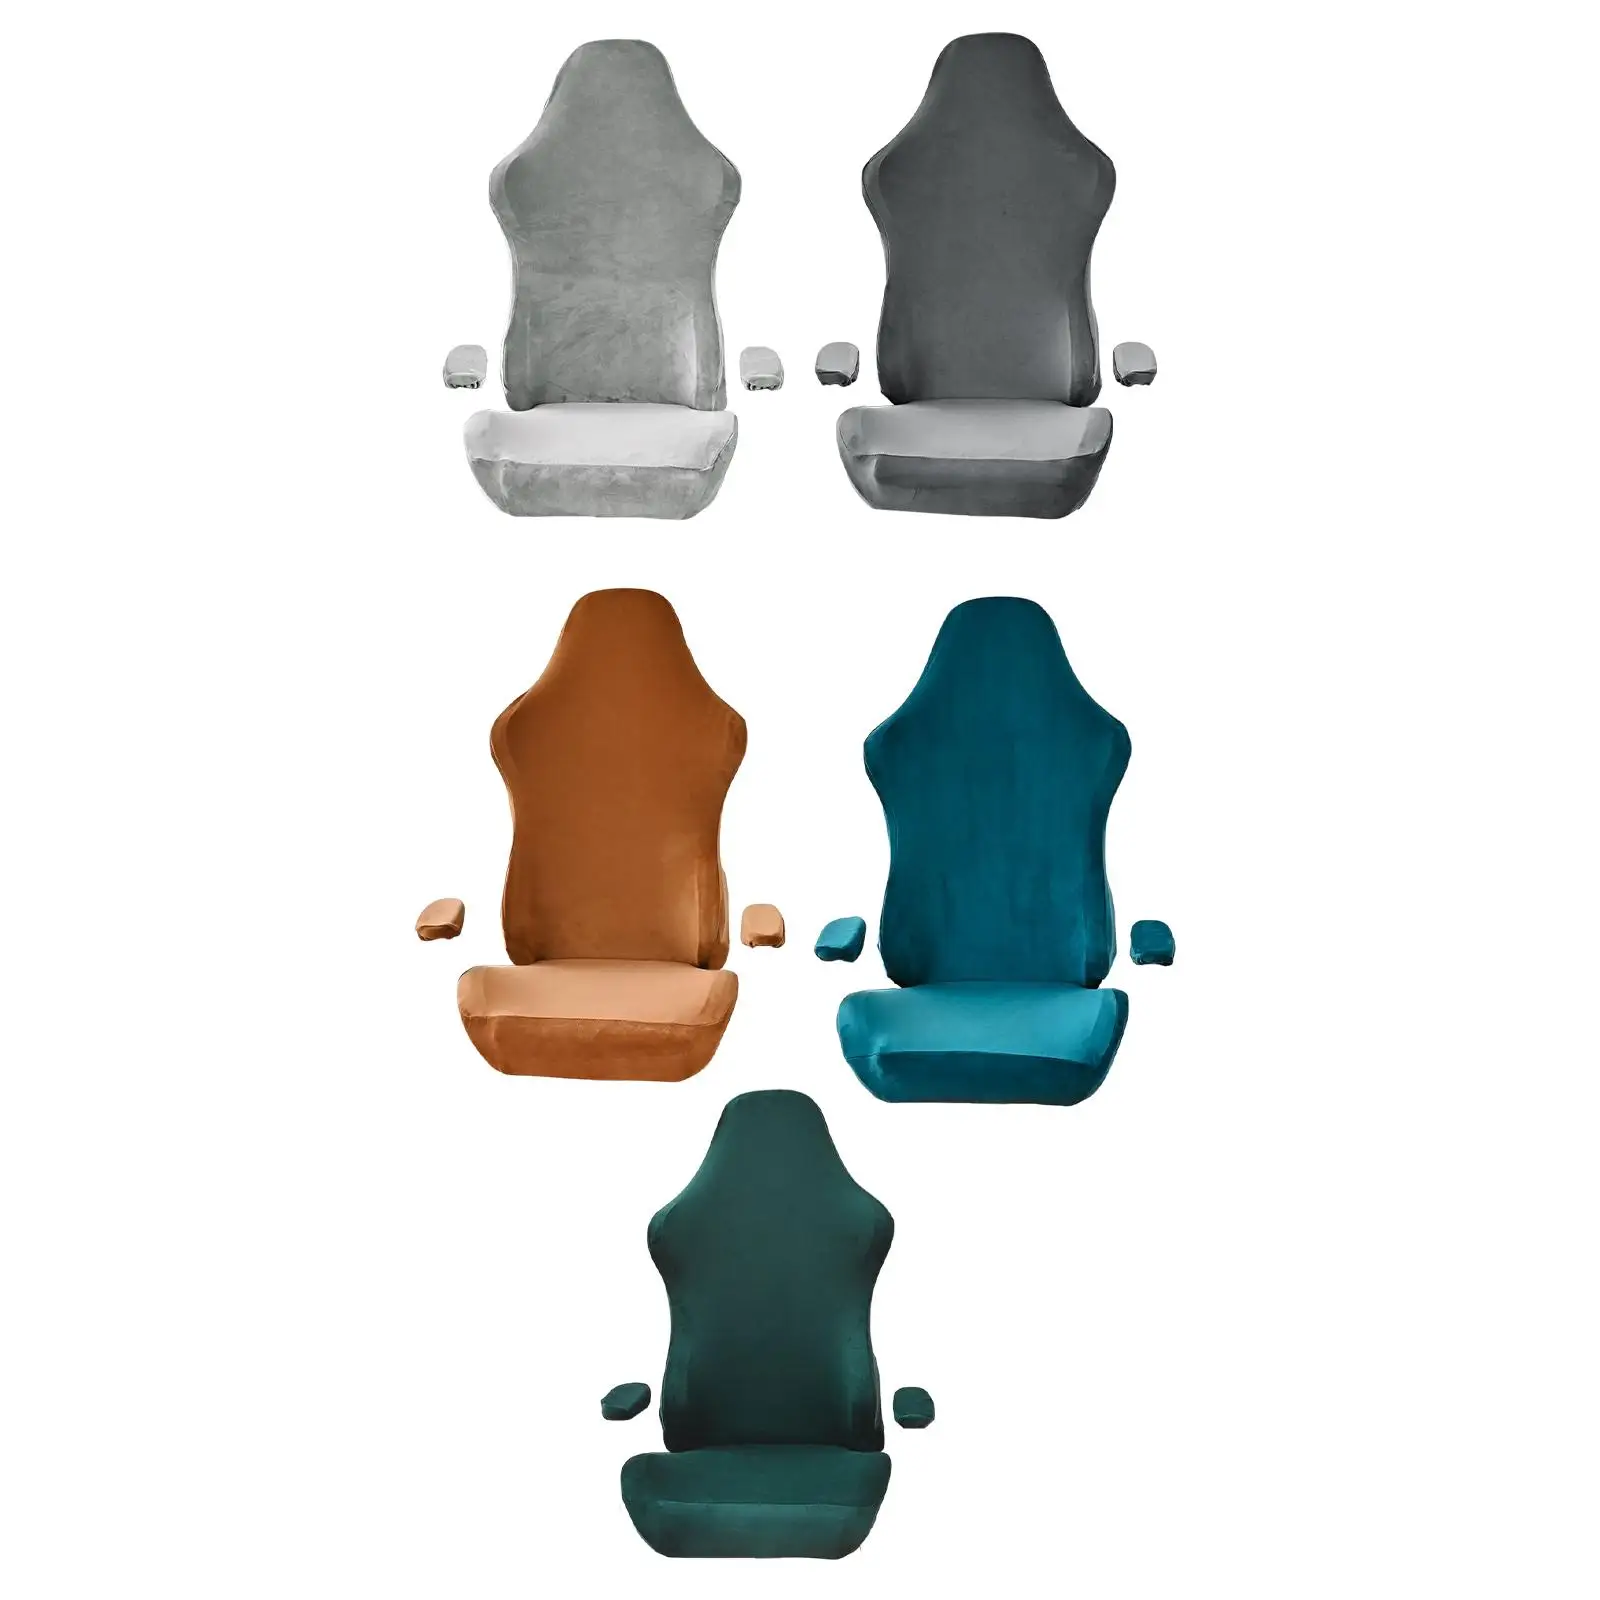 Gaming Chair Covers, Chair Covers Made of Soft Polyester, , Office Chair Slipcover for Office Swivel Chair, Computer Chair,